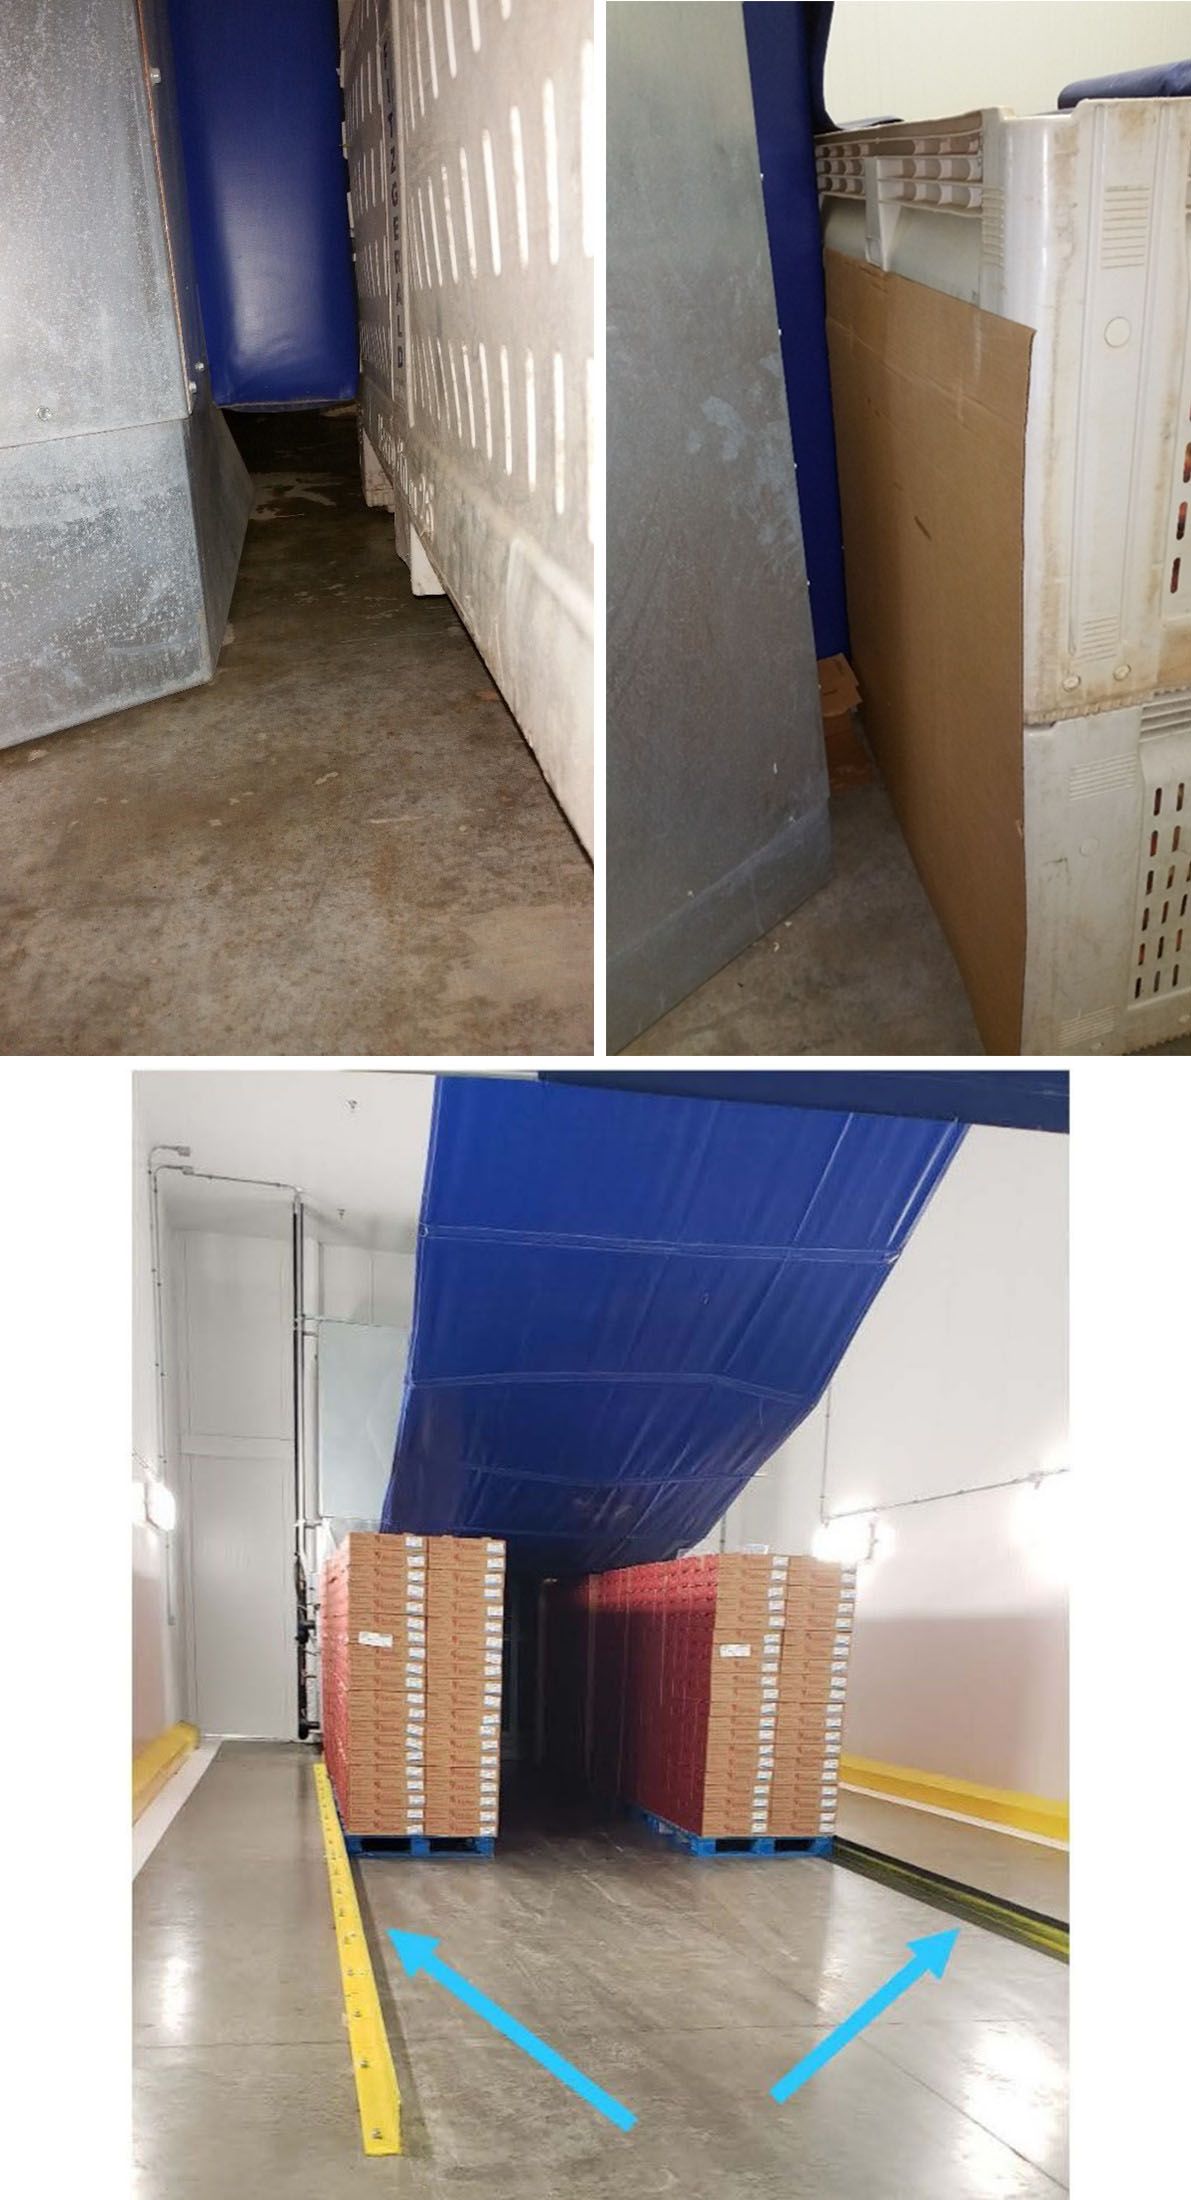 Side view at the front of a forced-air cooling tunnel showing: (top left) openings under blue foam pad and at the base of the white adjoining bin; and (top right) these openings blocked with corrugated sheets to improve cooling efficiency. In the bottom image, the fixed angle irons serve to align the pallets as well as block airflow underneath the pallets. 